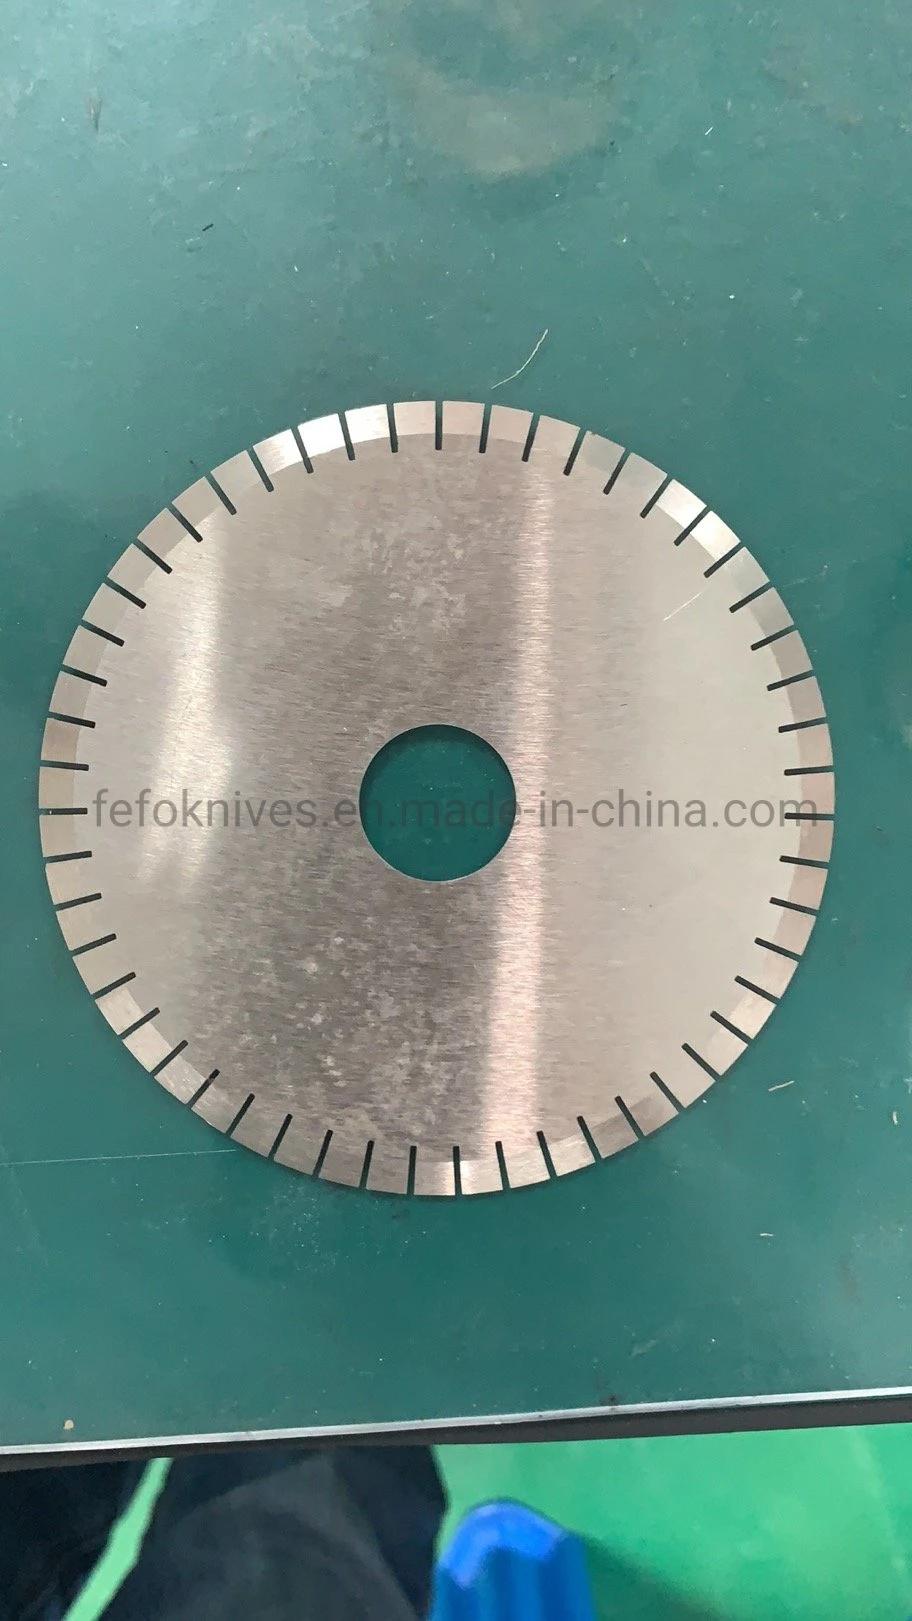 China Manufacturer of Straight and Circular Replacement Blades for Rubber and Tire Industry